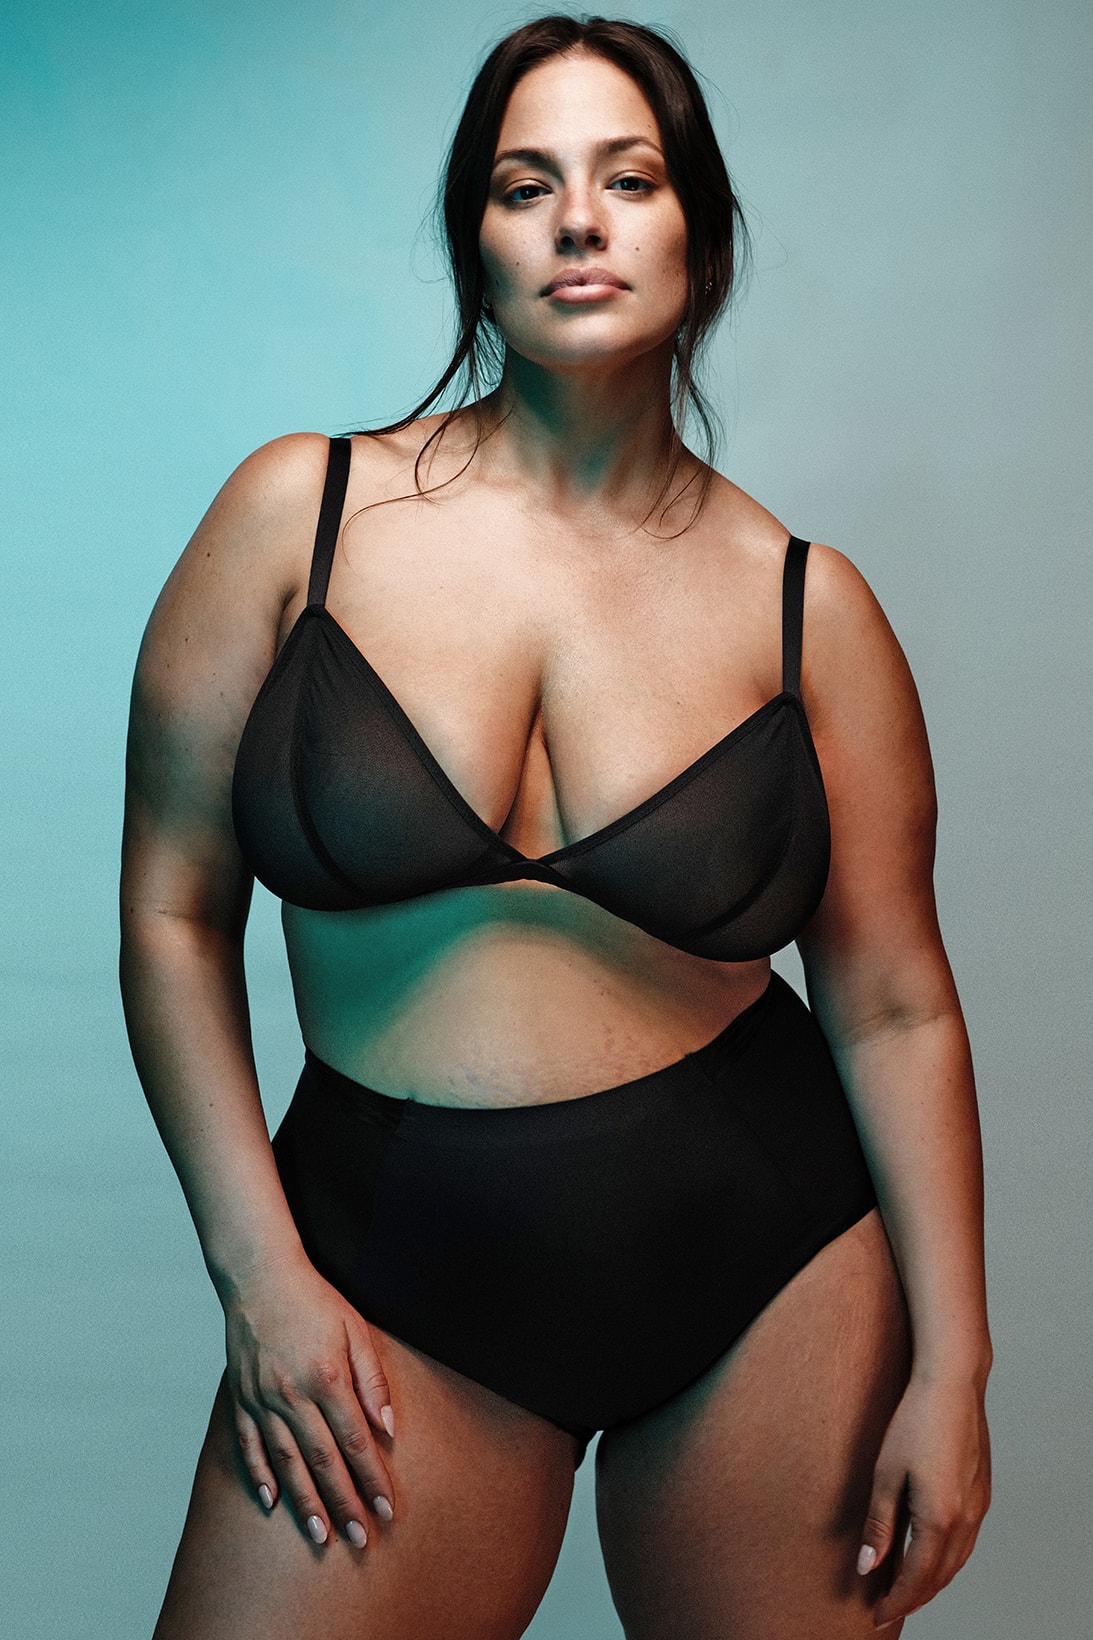 A Textured Bodysuit: Micro Modal Rib Bodysuit, The Ashley Graham x Knix  Collab Includes Bras, Underwear, and Chic Bodysuits